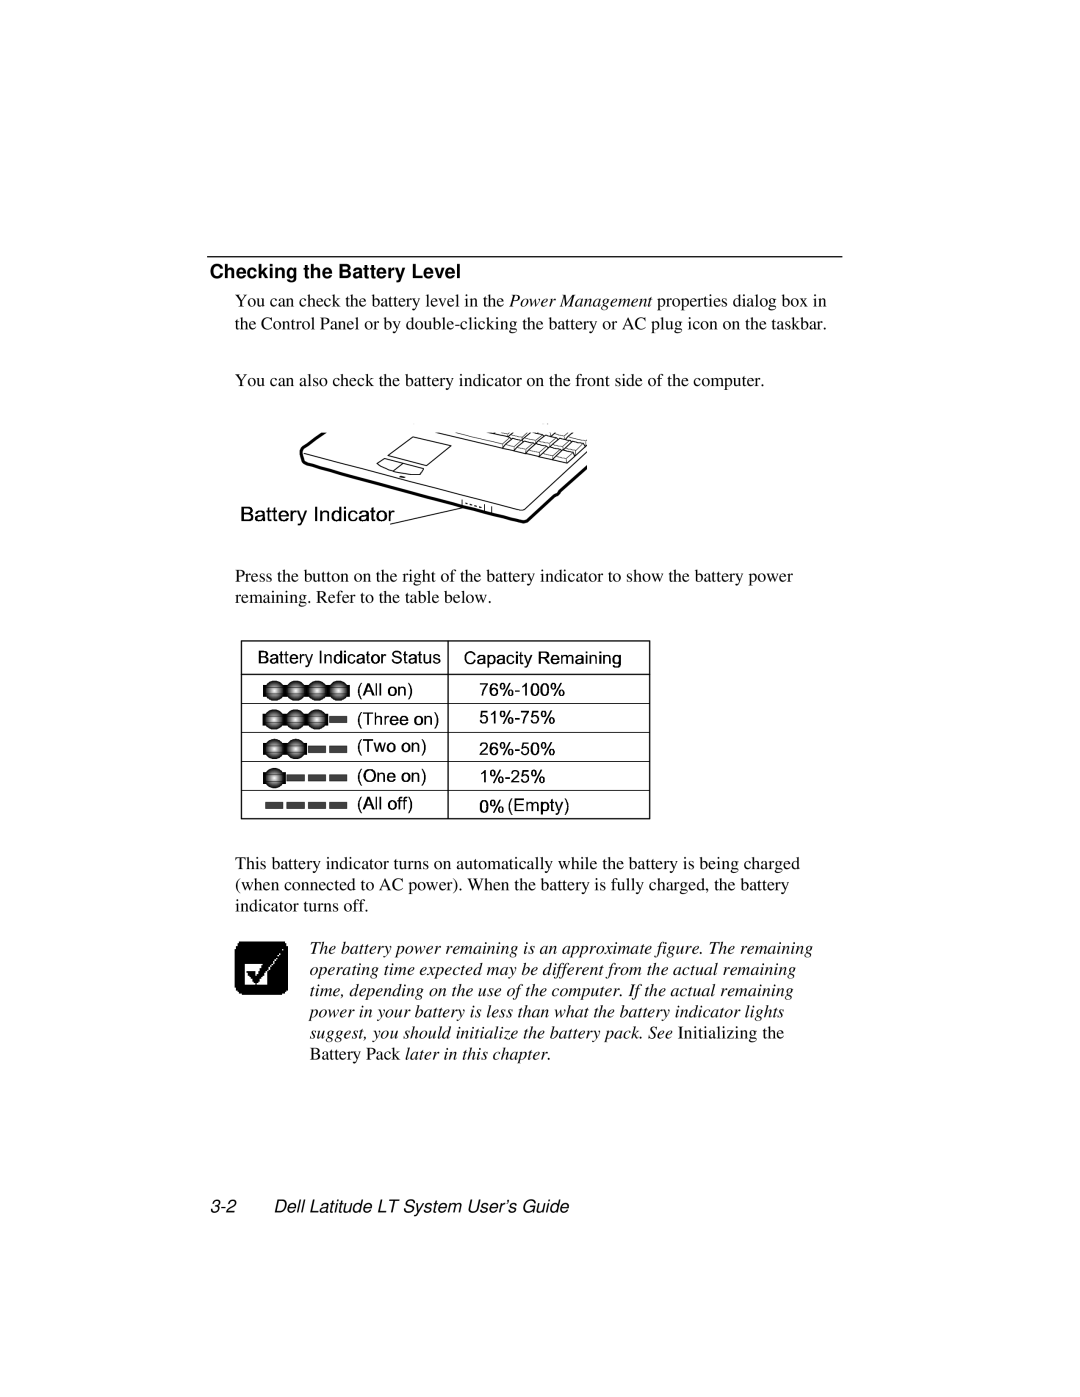 Dell LT System manual Checking the Battery Level 